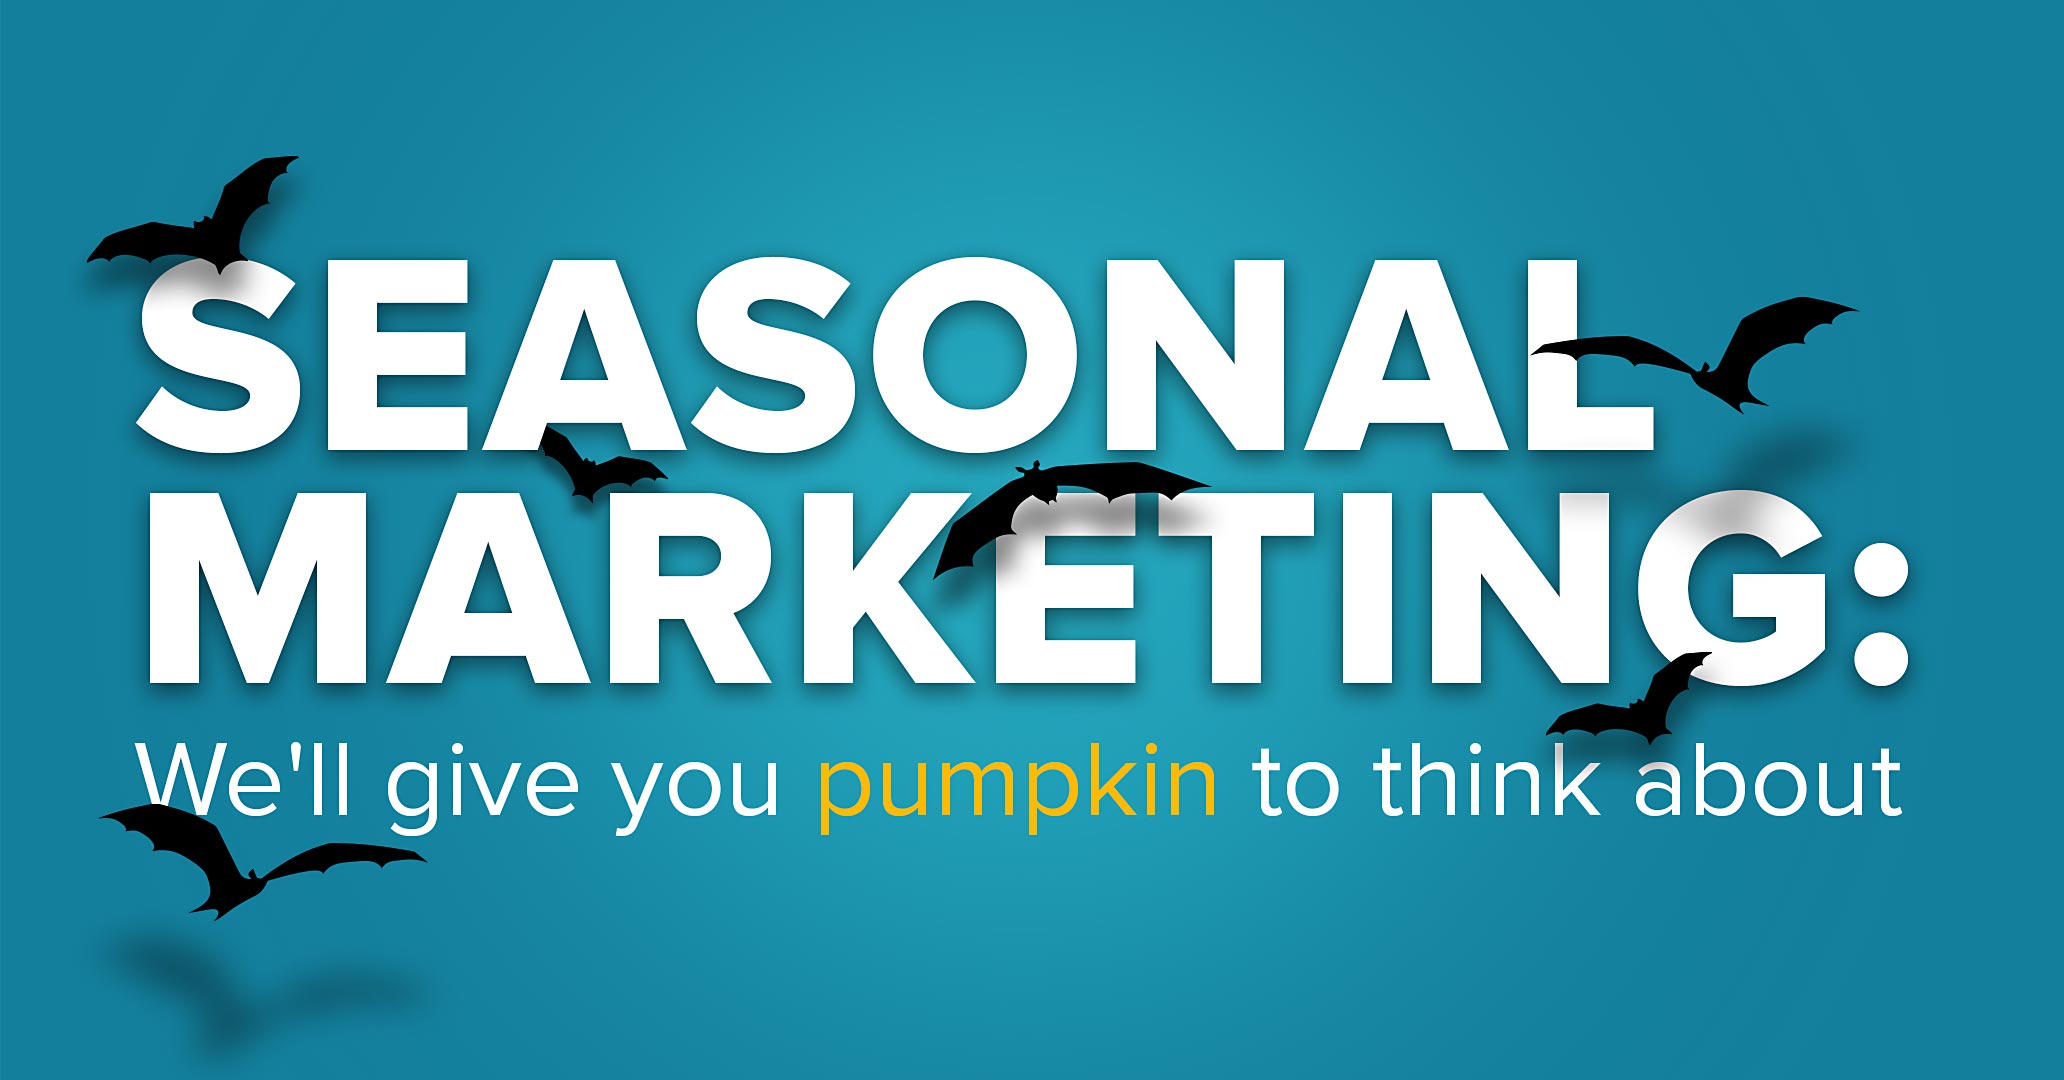 Seasonal marketing: giving you pumpkin to think about